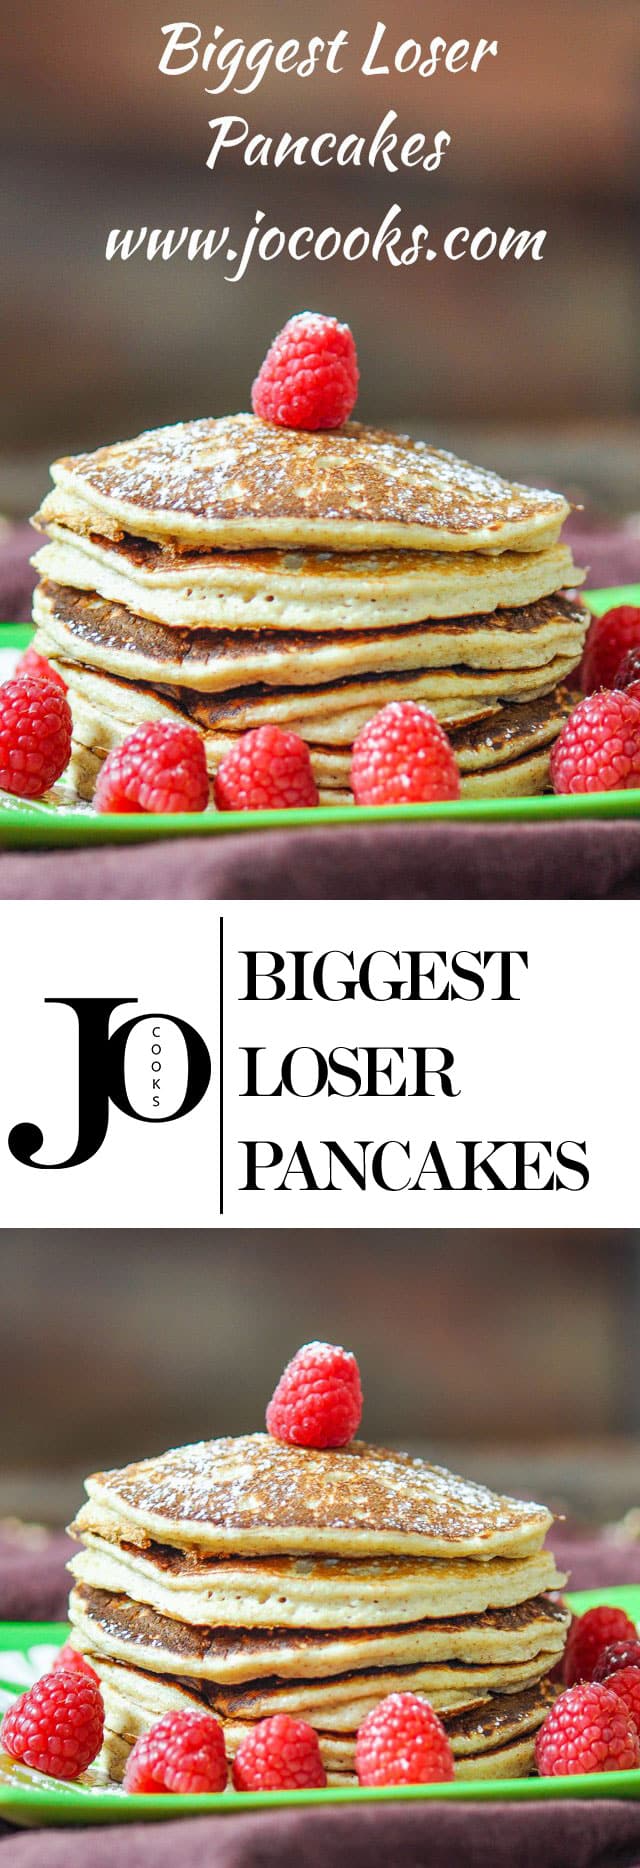 Biggest Loser Pancakes - you won't believe the ingredients and you won't believe how good they are at only 220 calories for 3 pancakes.